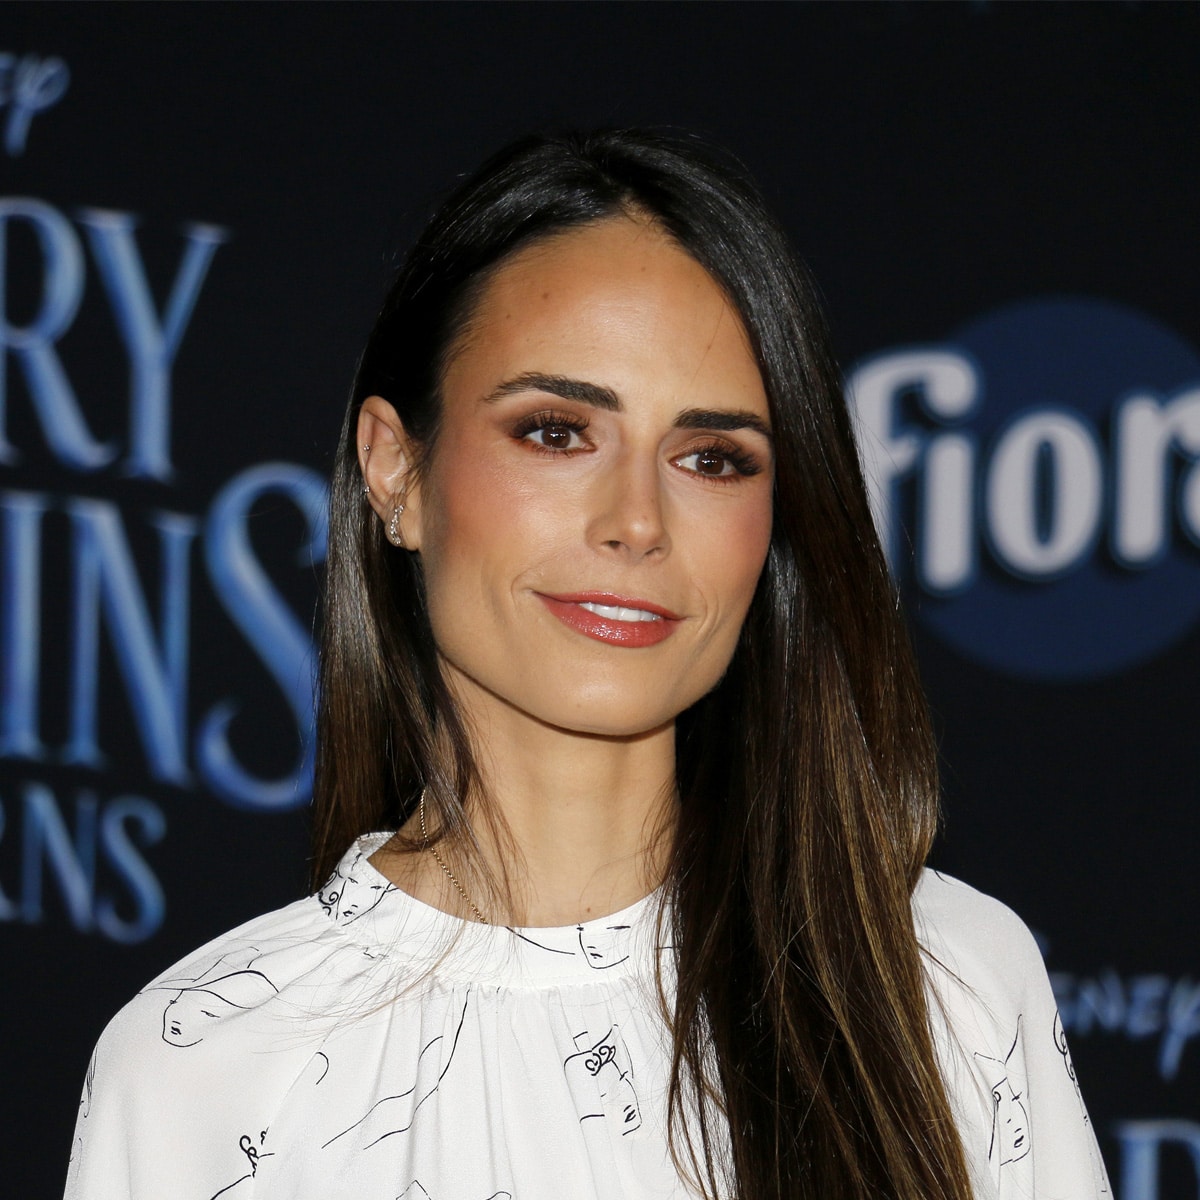 actress jordana brewster at the world premiere of mary poppins